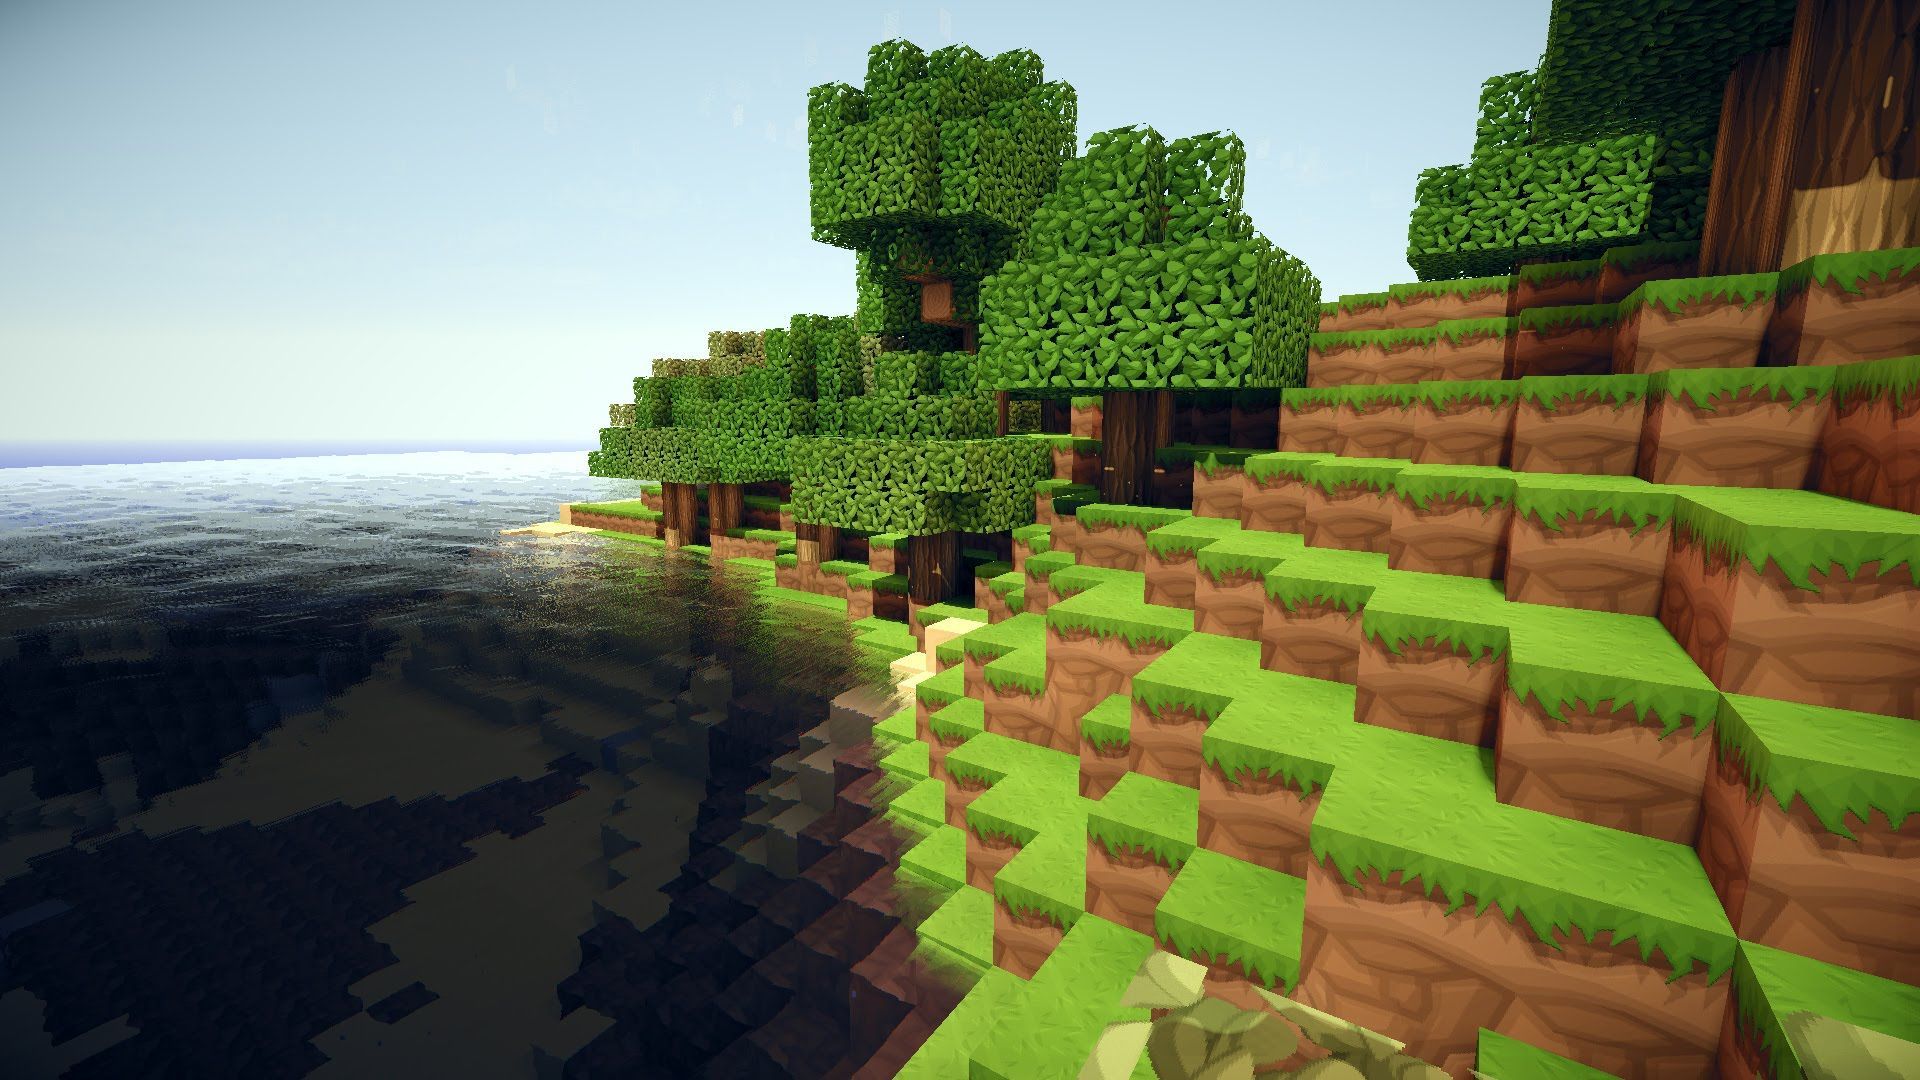 Awesome minecraft Background Wallpaper Download HD 12299 - HD ...